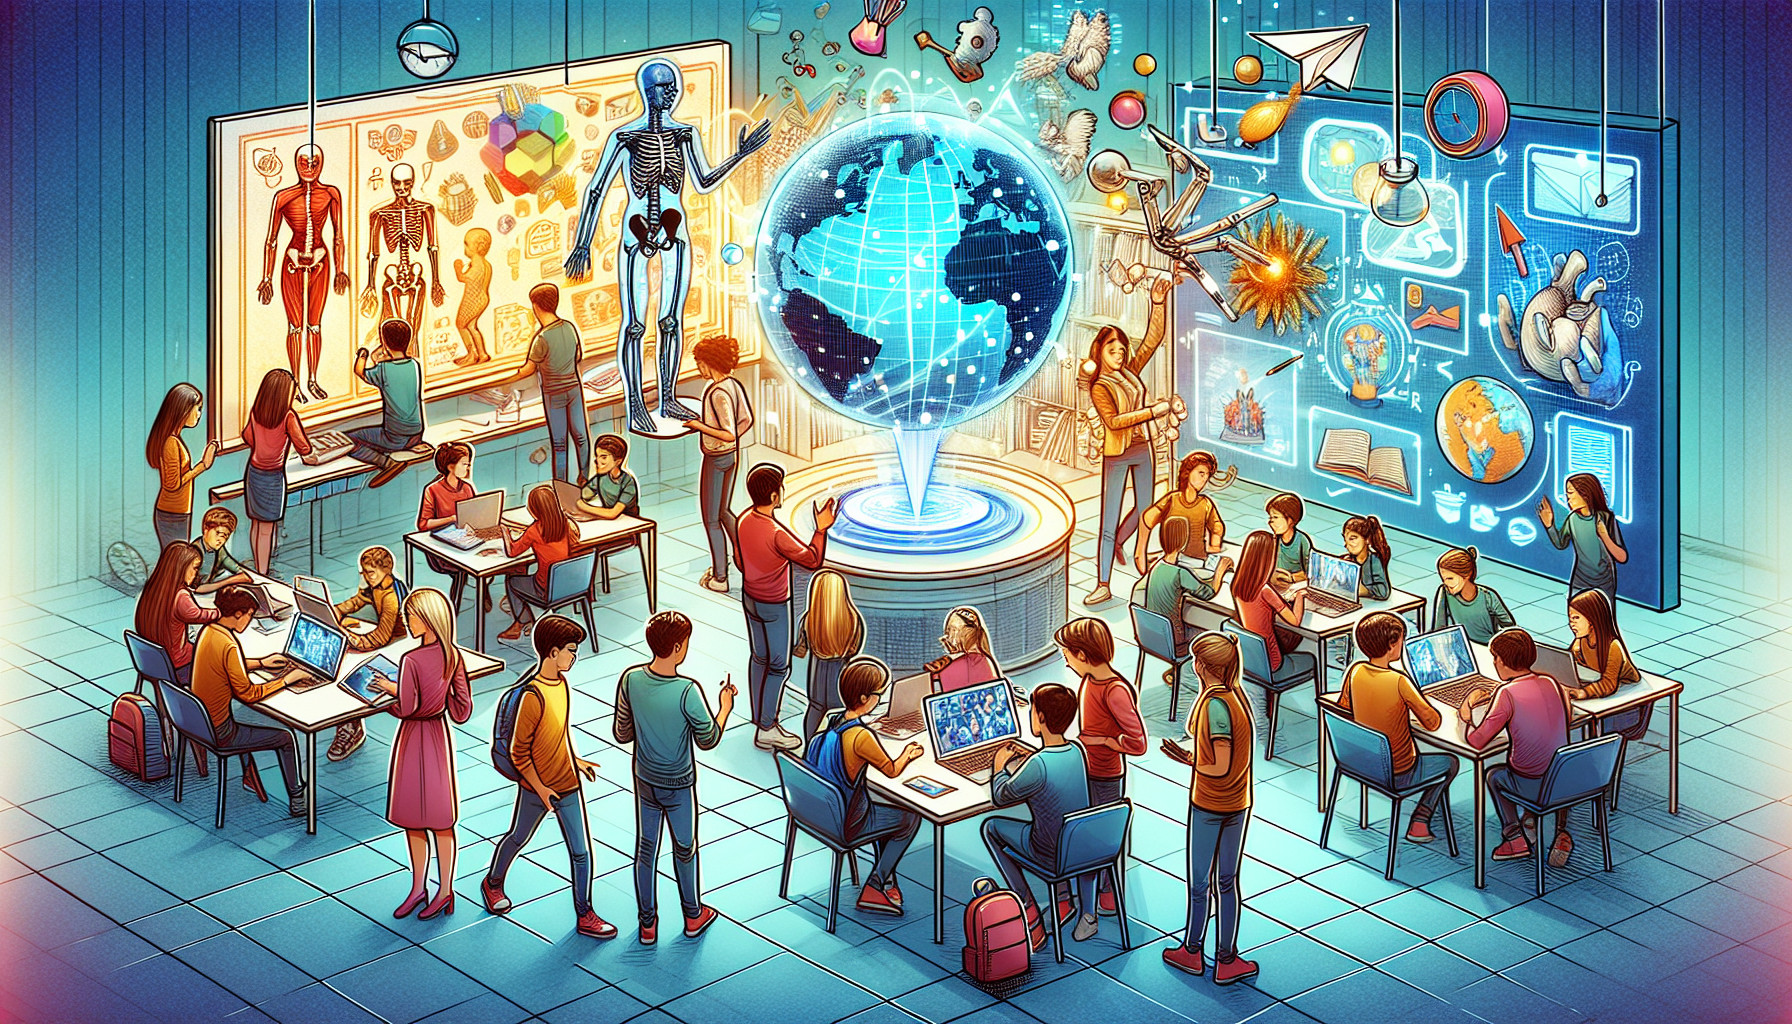 An engaging illustration of students interacting with multimedia and visual aids in a classroom setting